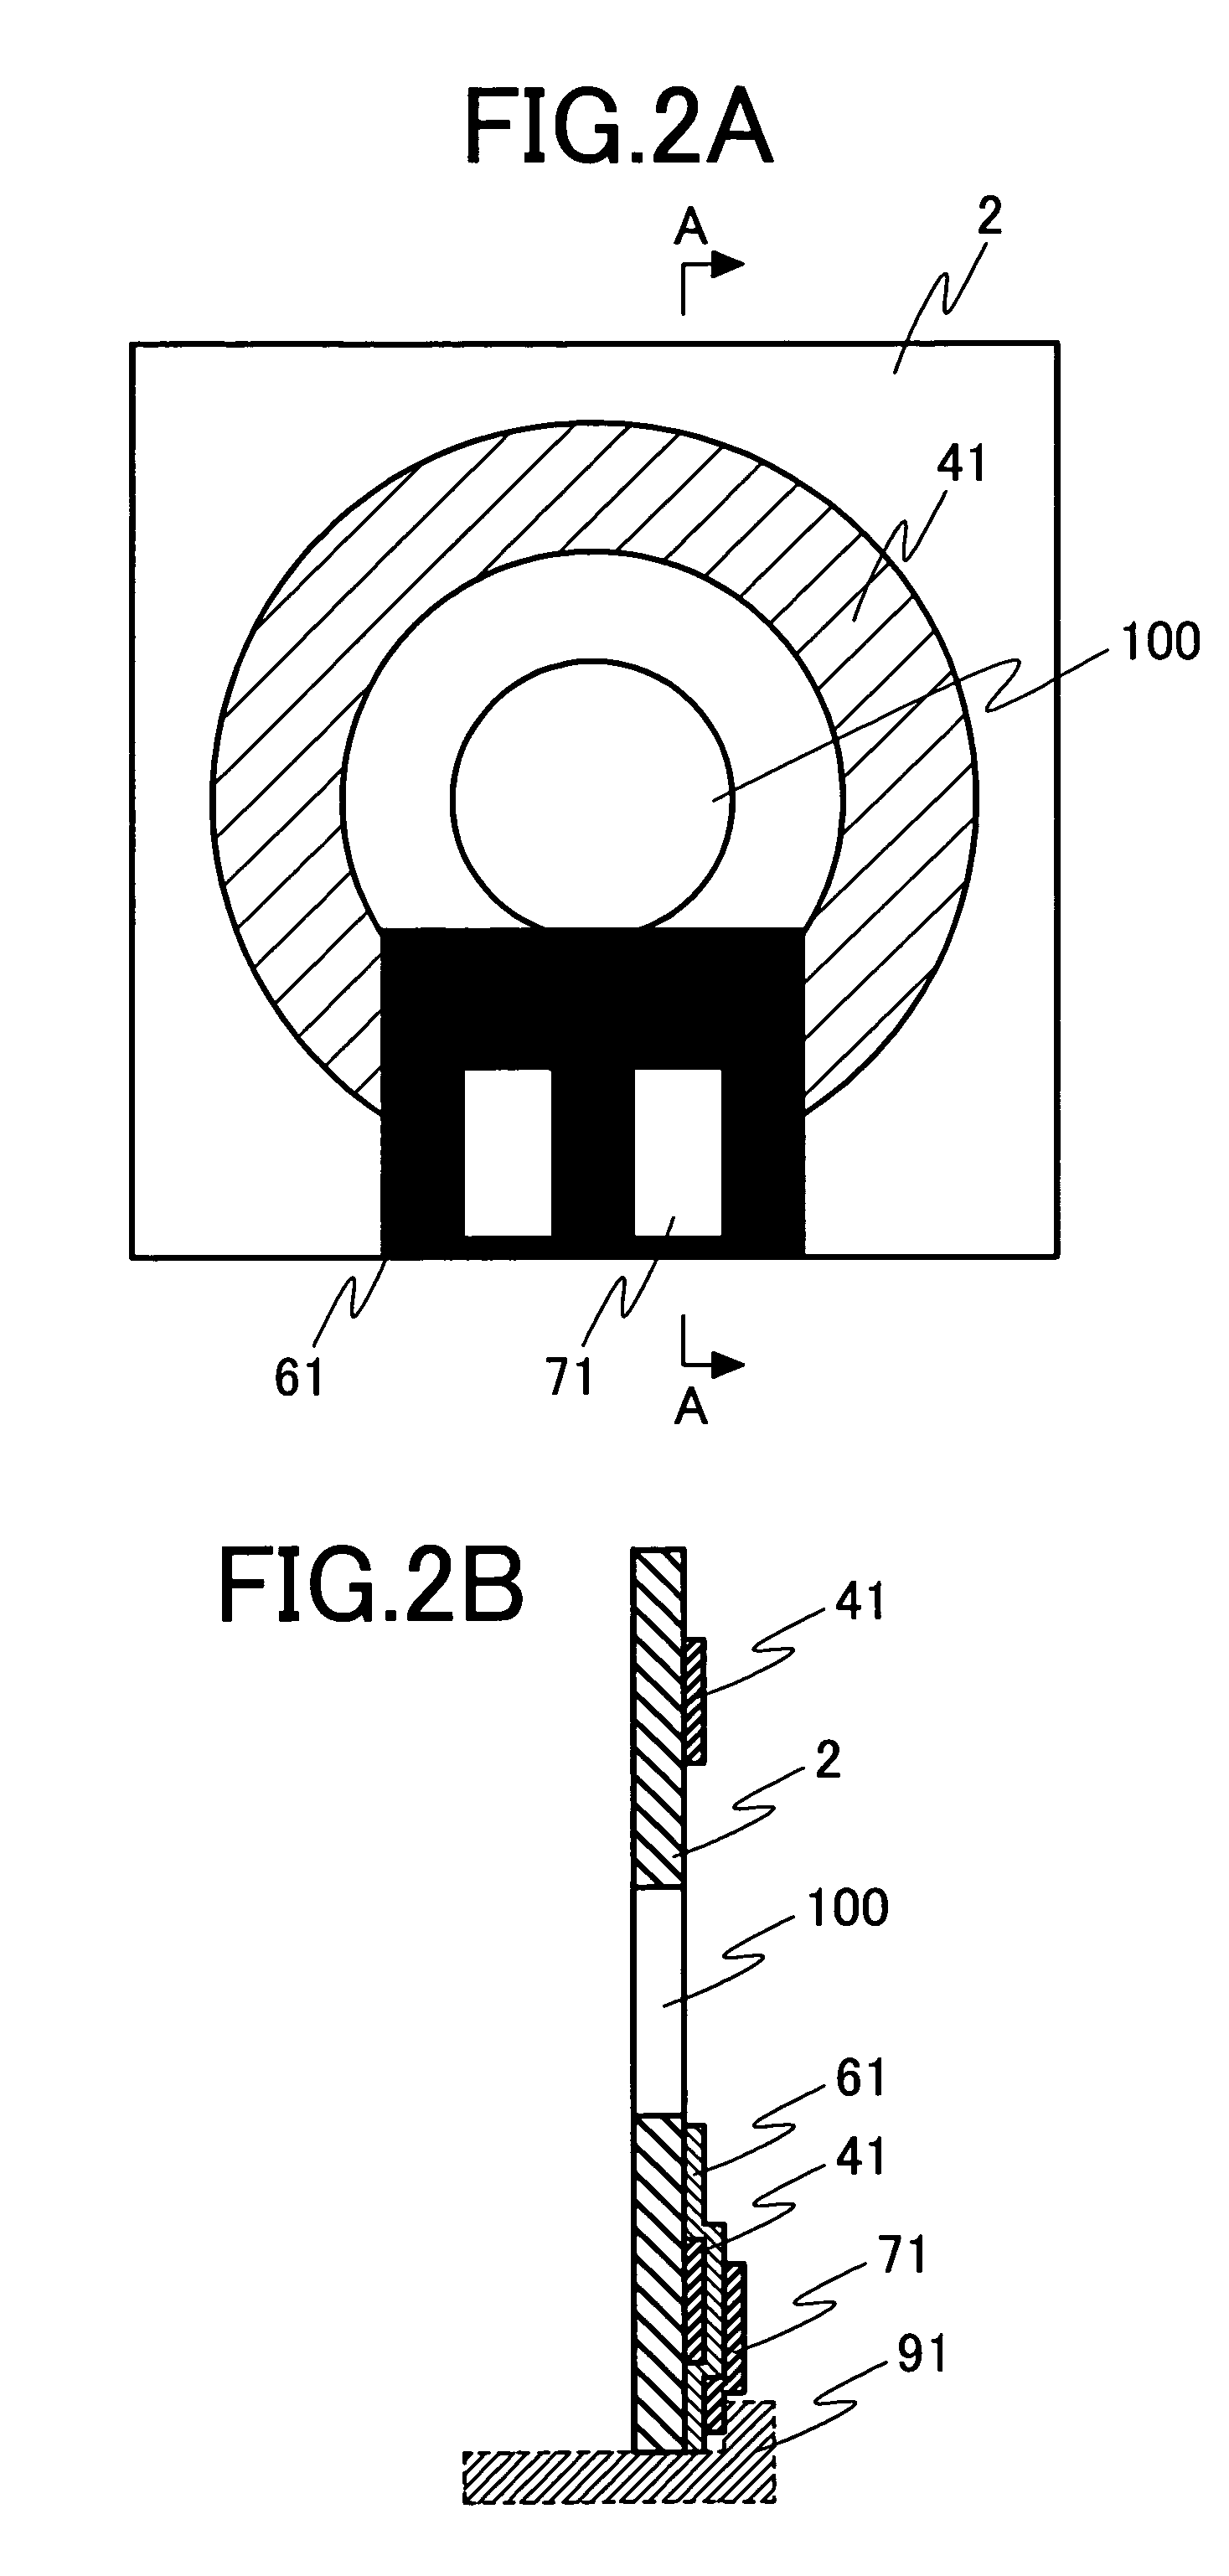 Nuclear magnetic resonance apparatus